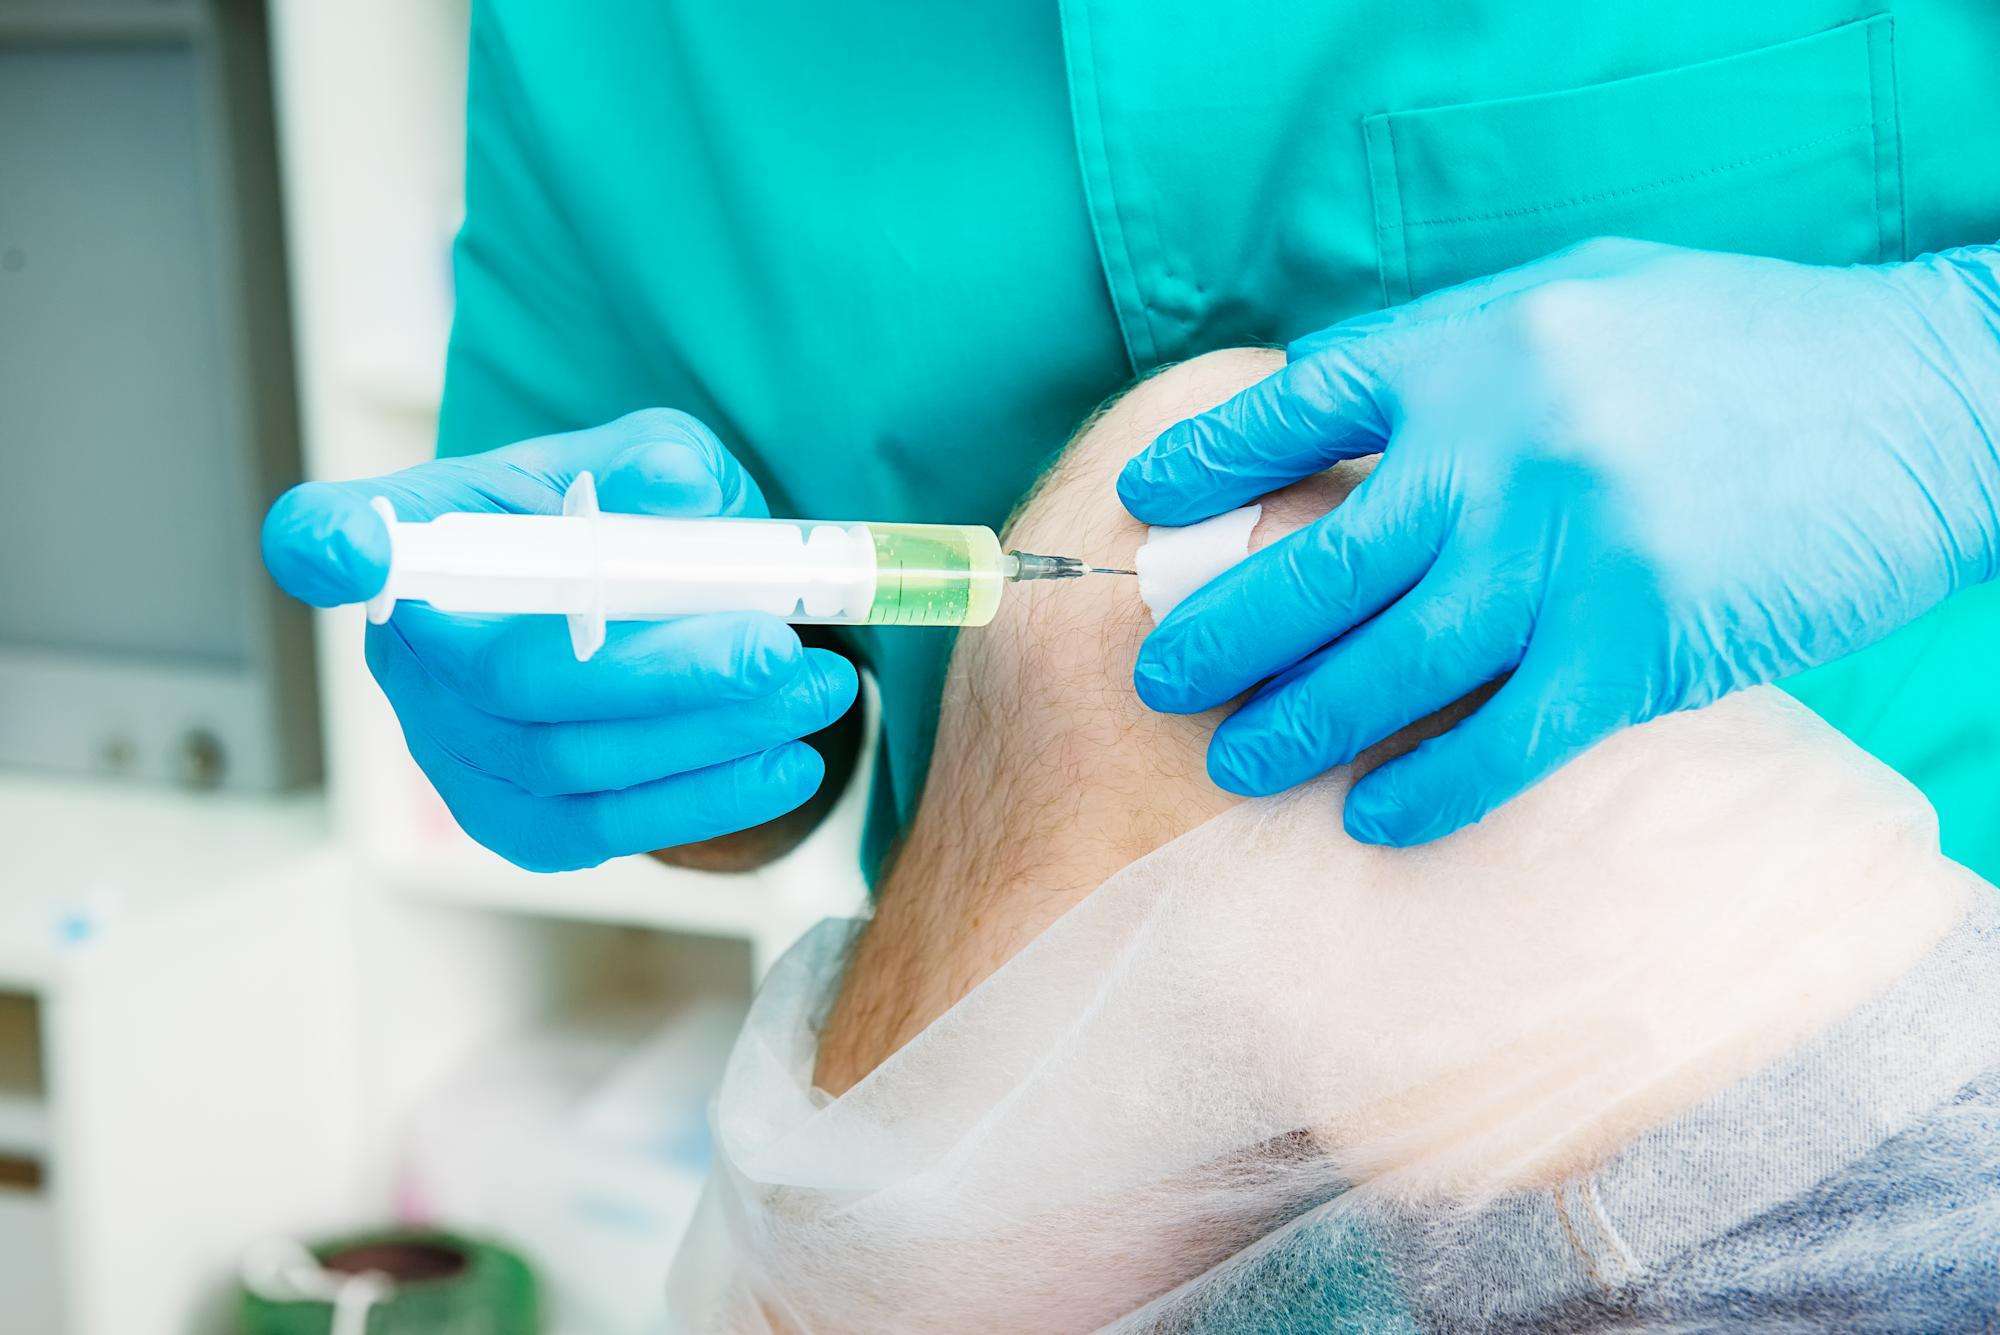 Steroid injections for osteoarthritis may not be safe